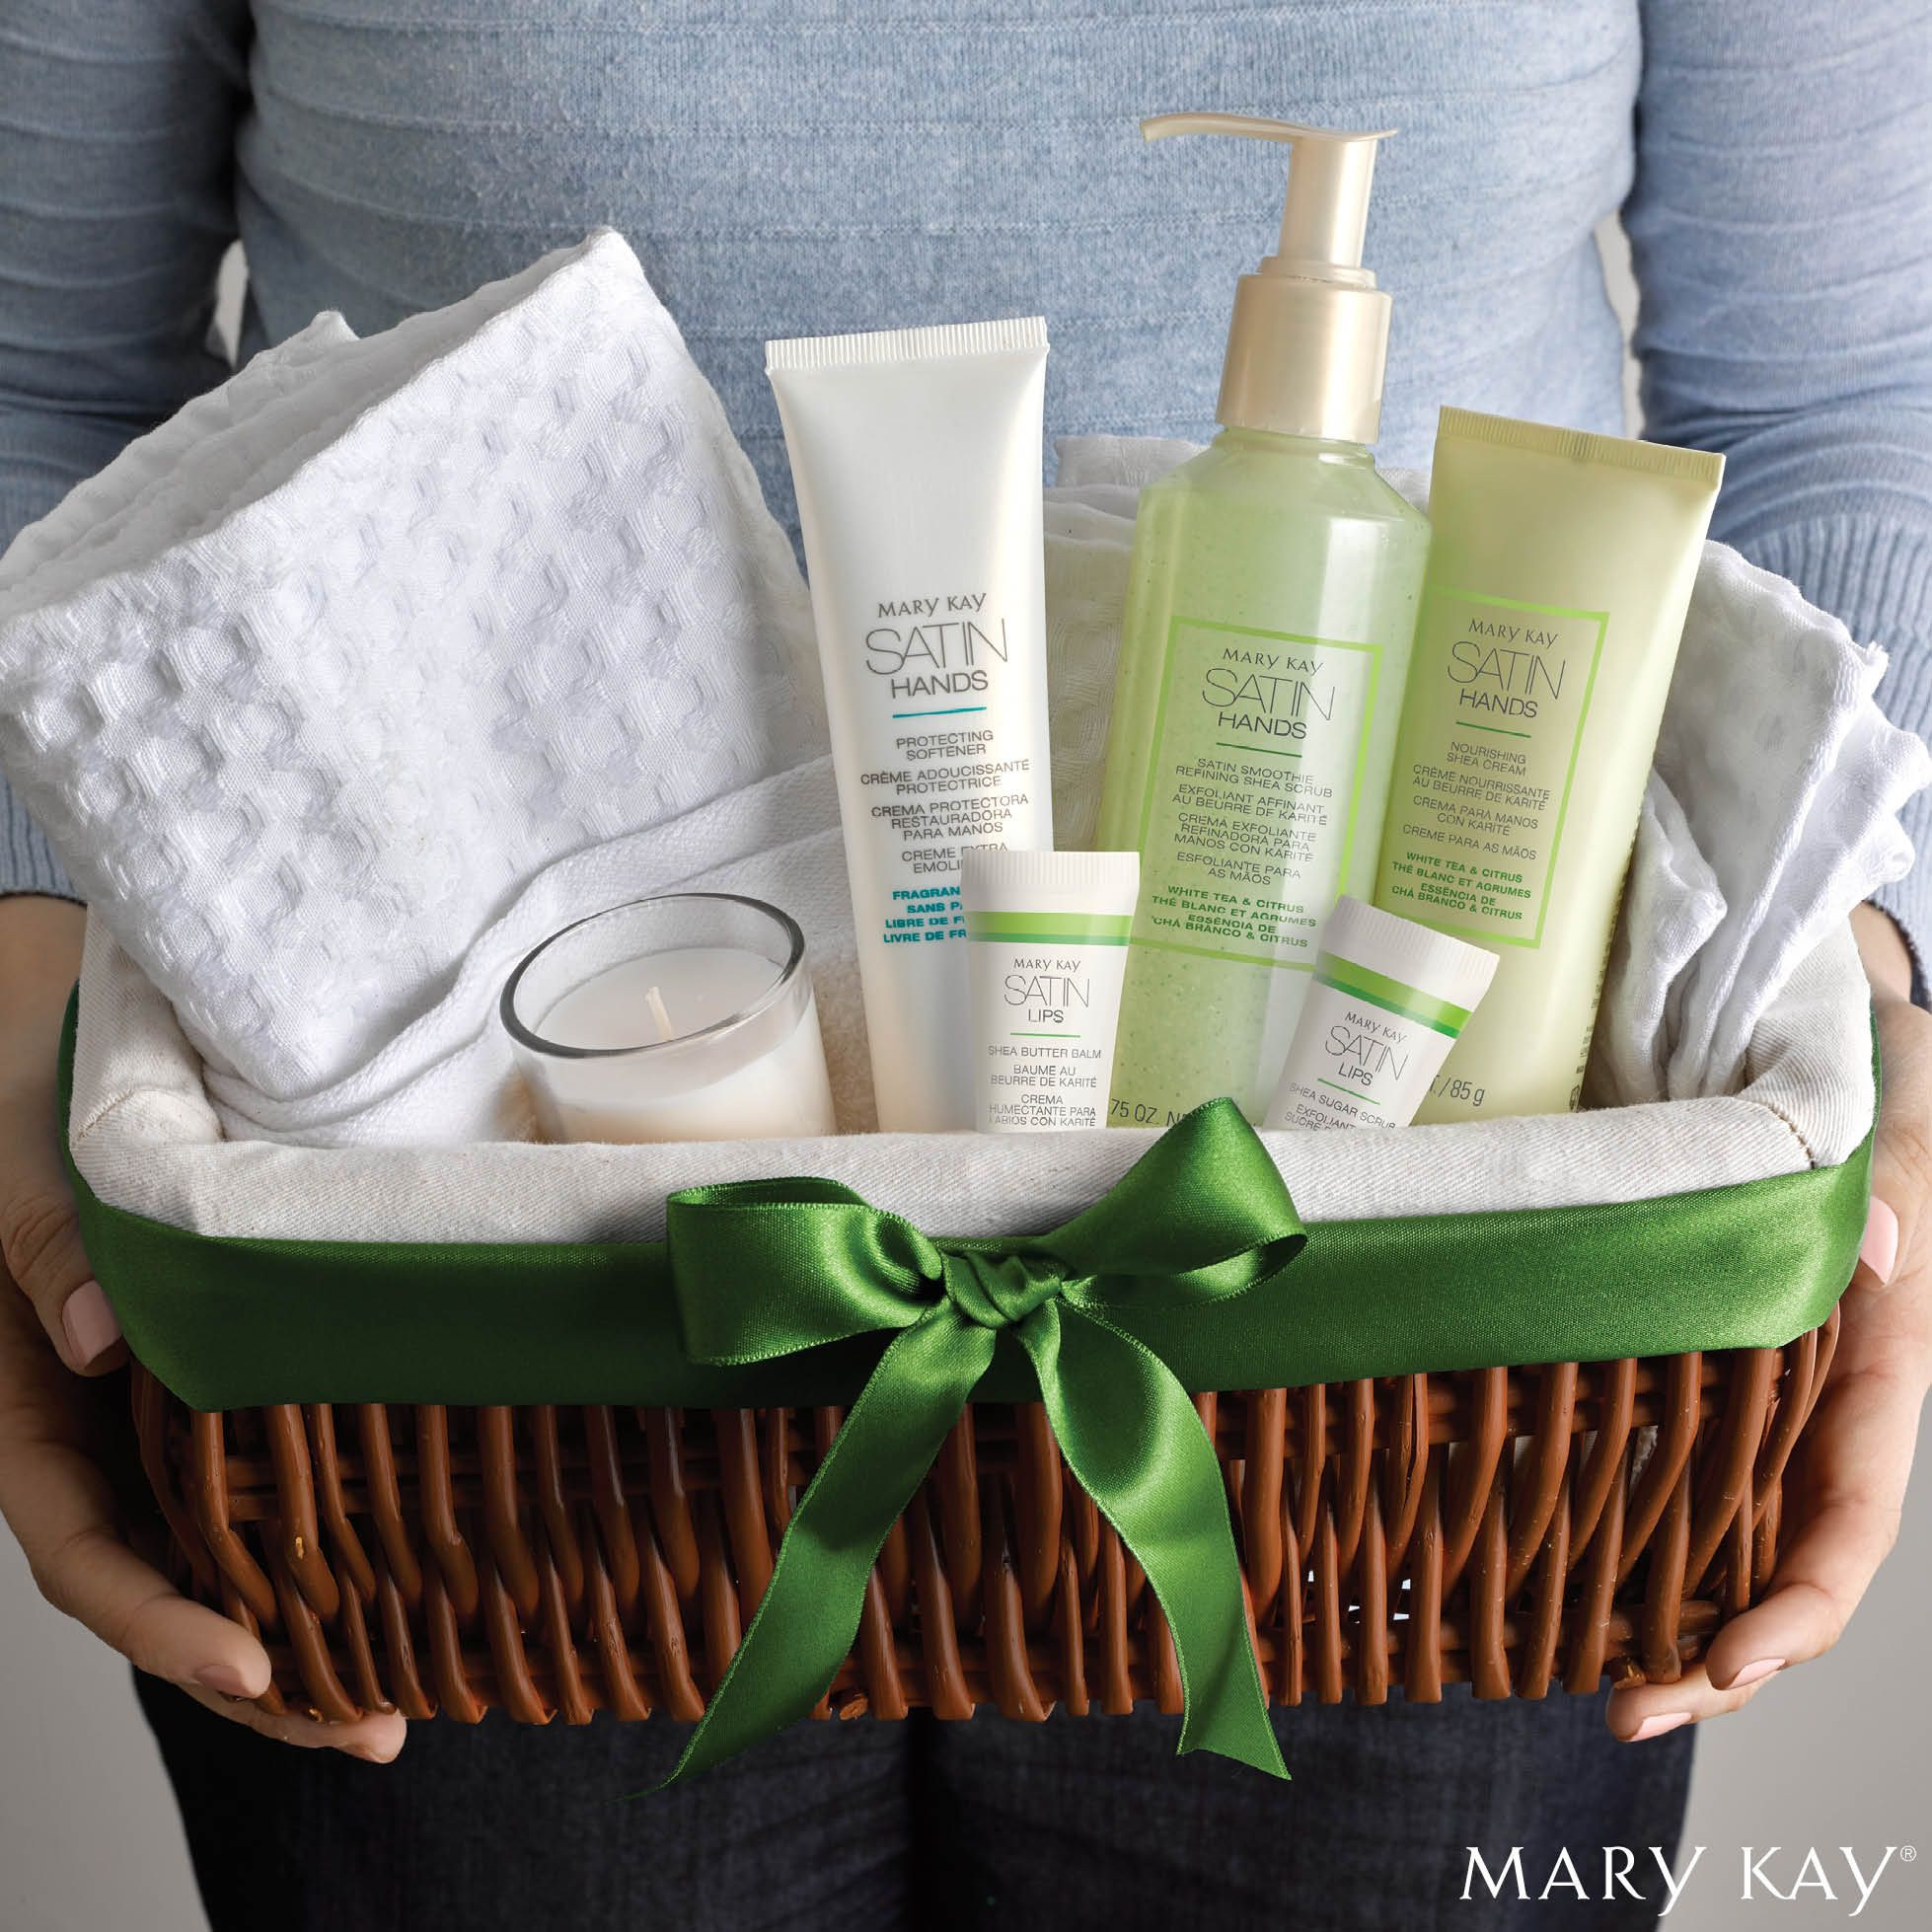 Mary Kay Holiday Gift Ideas
 Give the t of soft and supple hands this holiday season